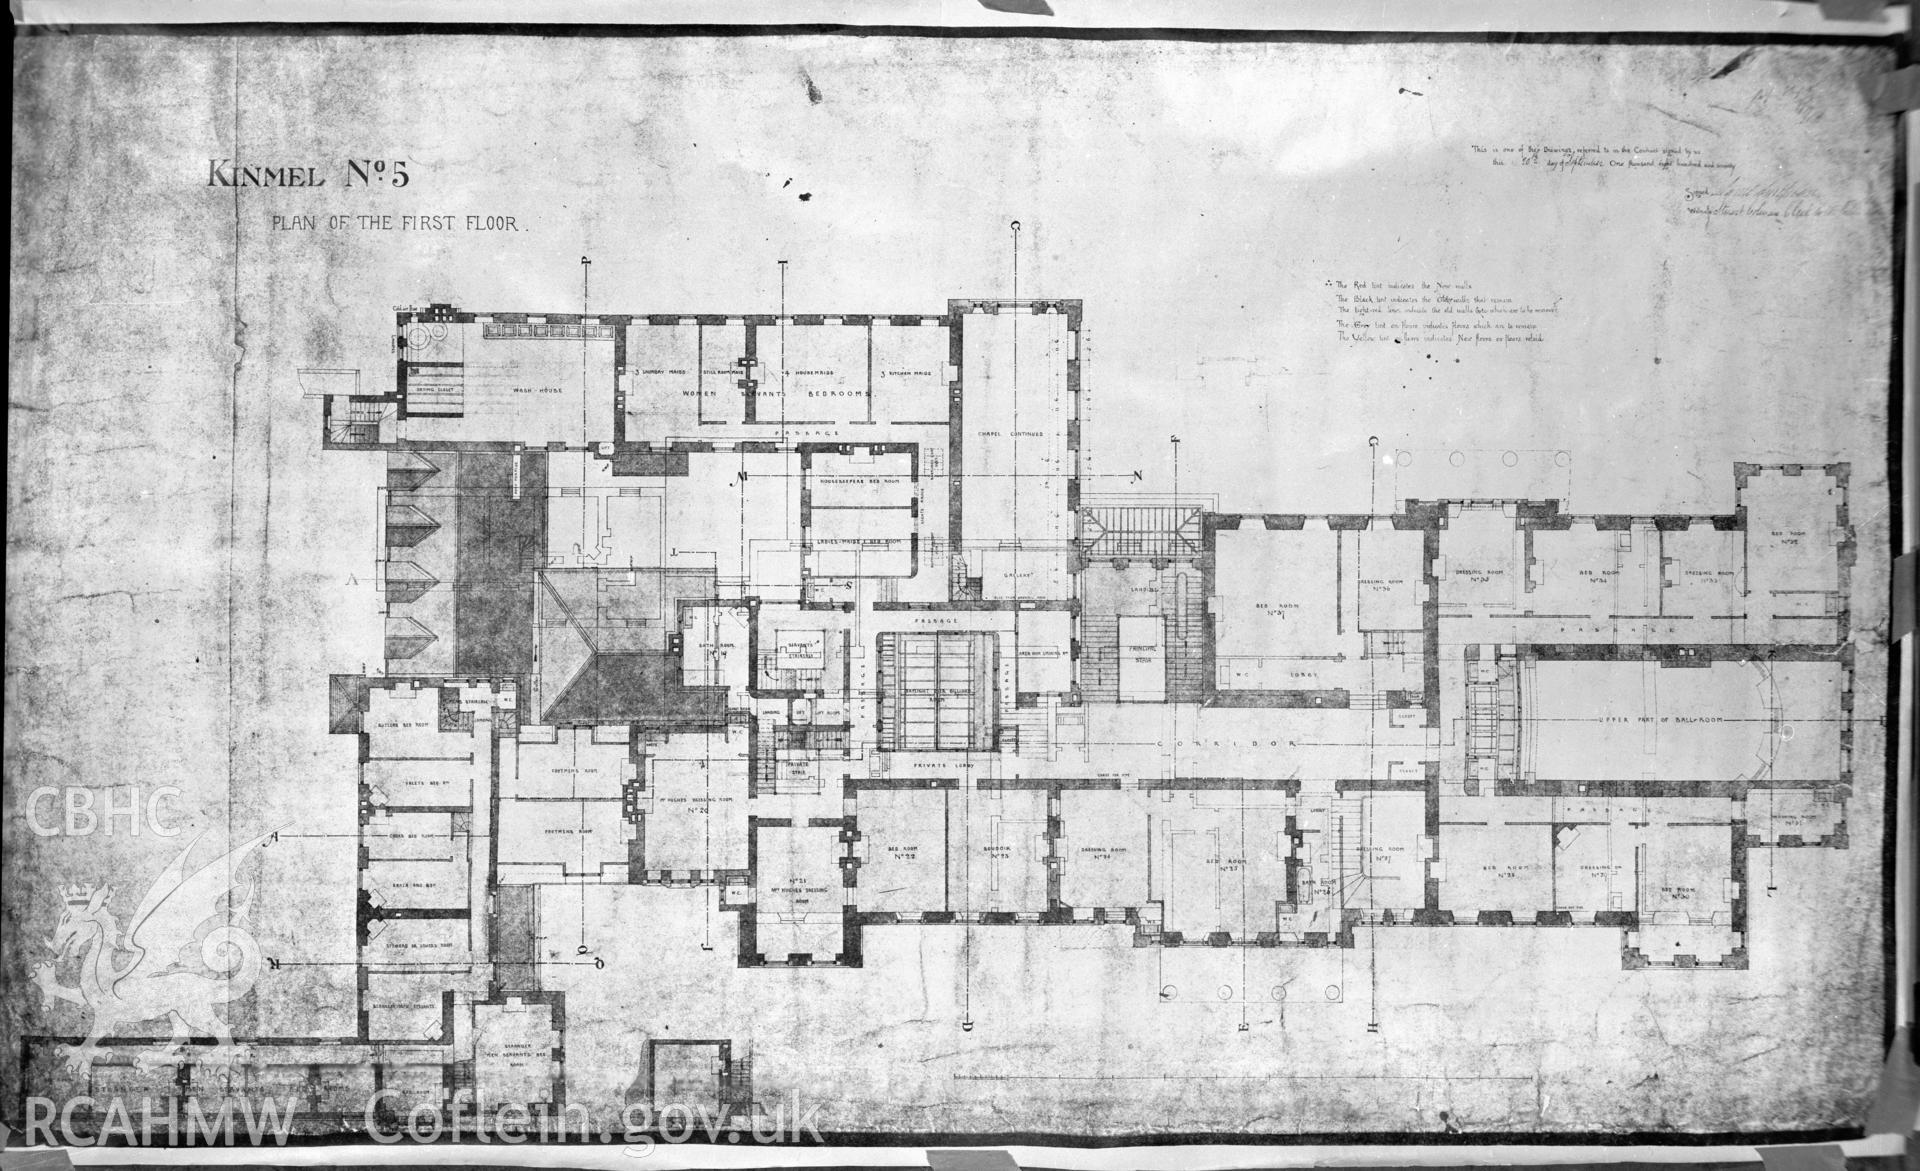 Black and white acetate negative showing 1870 plan of the first floor at Kinmel.